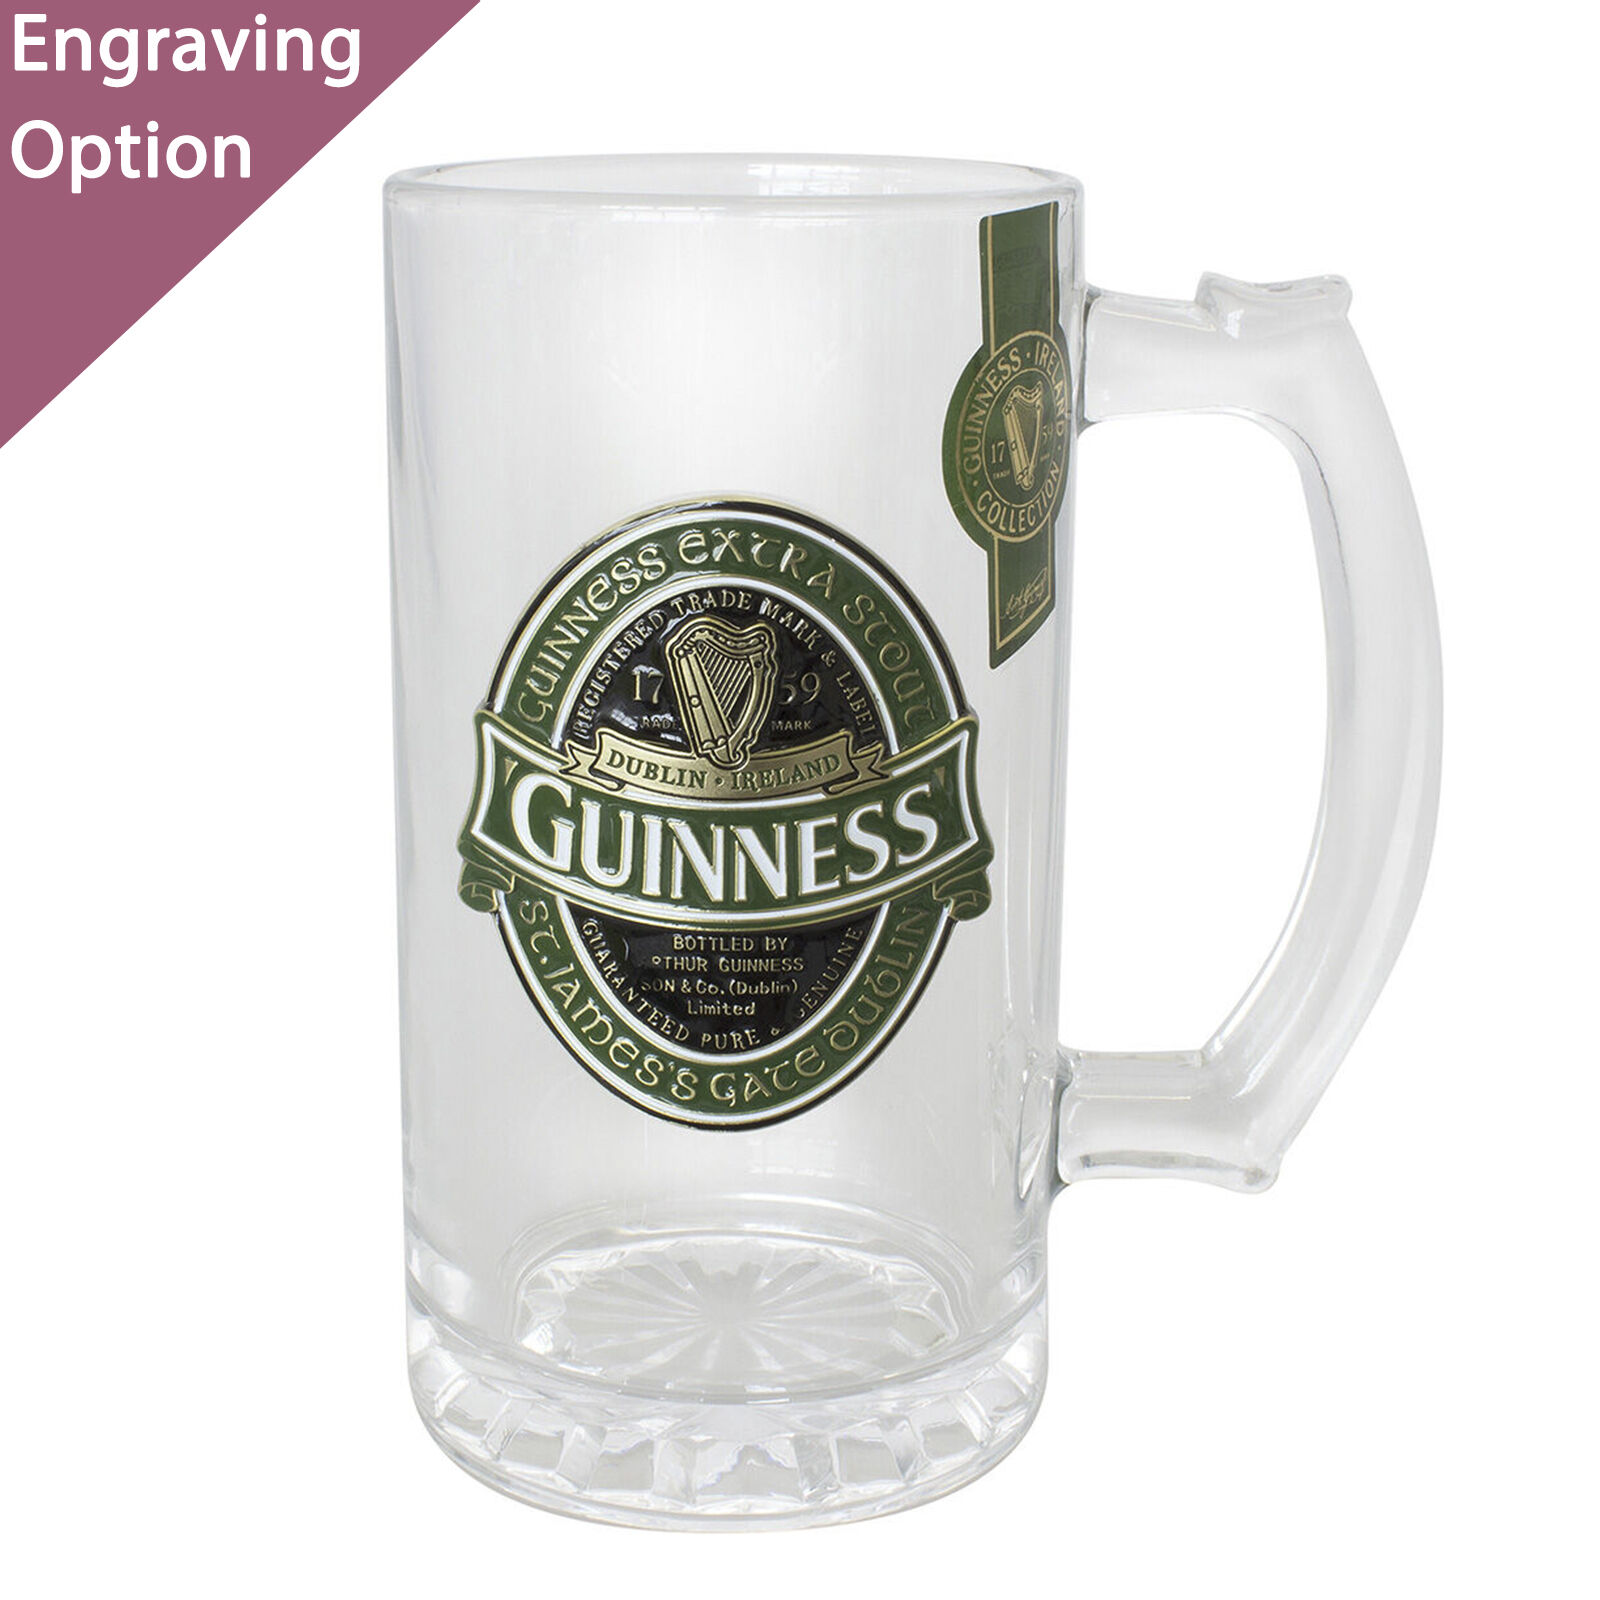 Guinness Ceramic Tankard With Guinness Classic Collection Black Label Design 